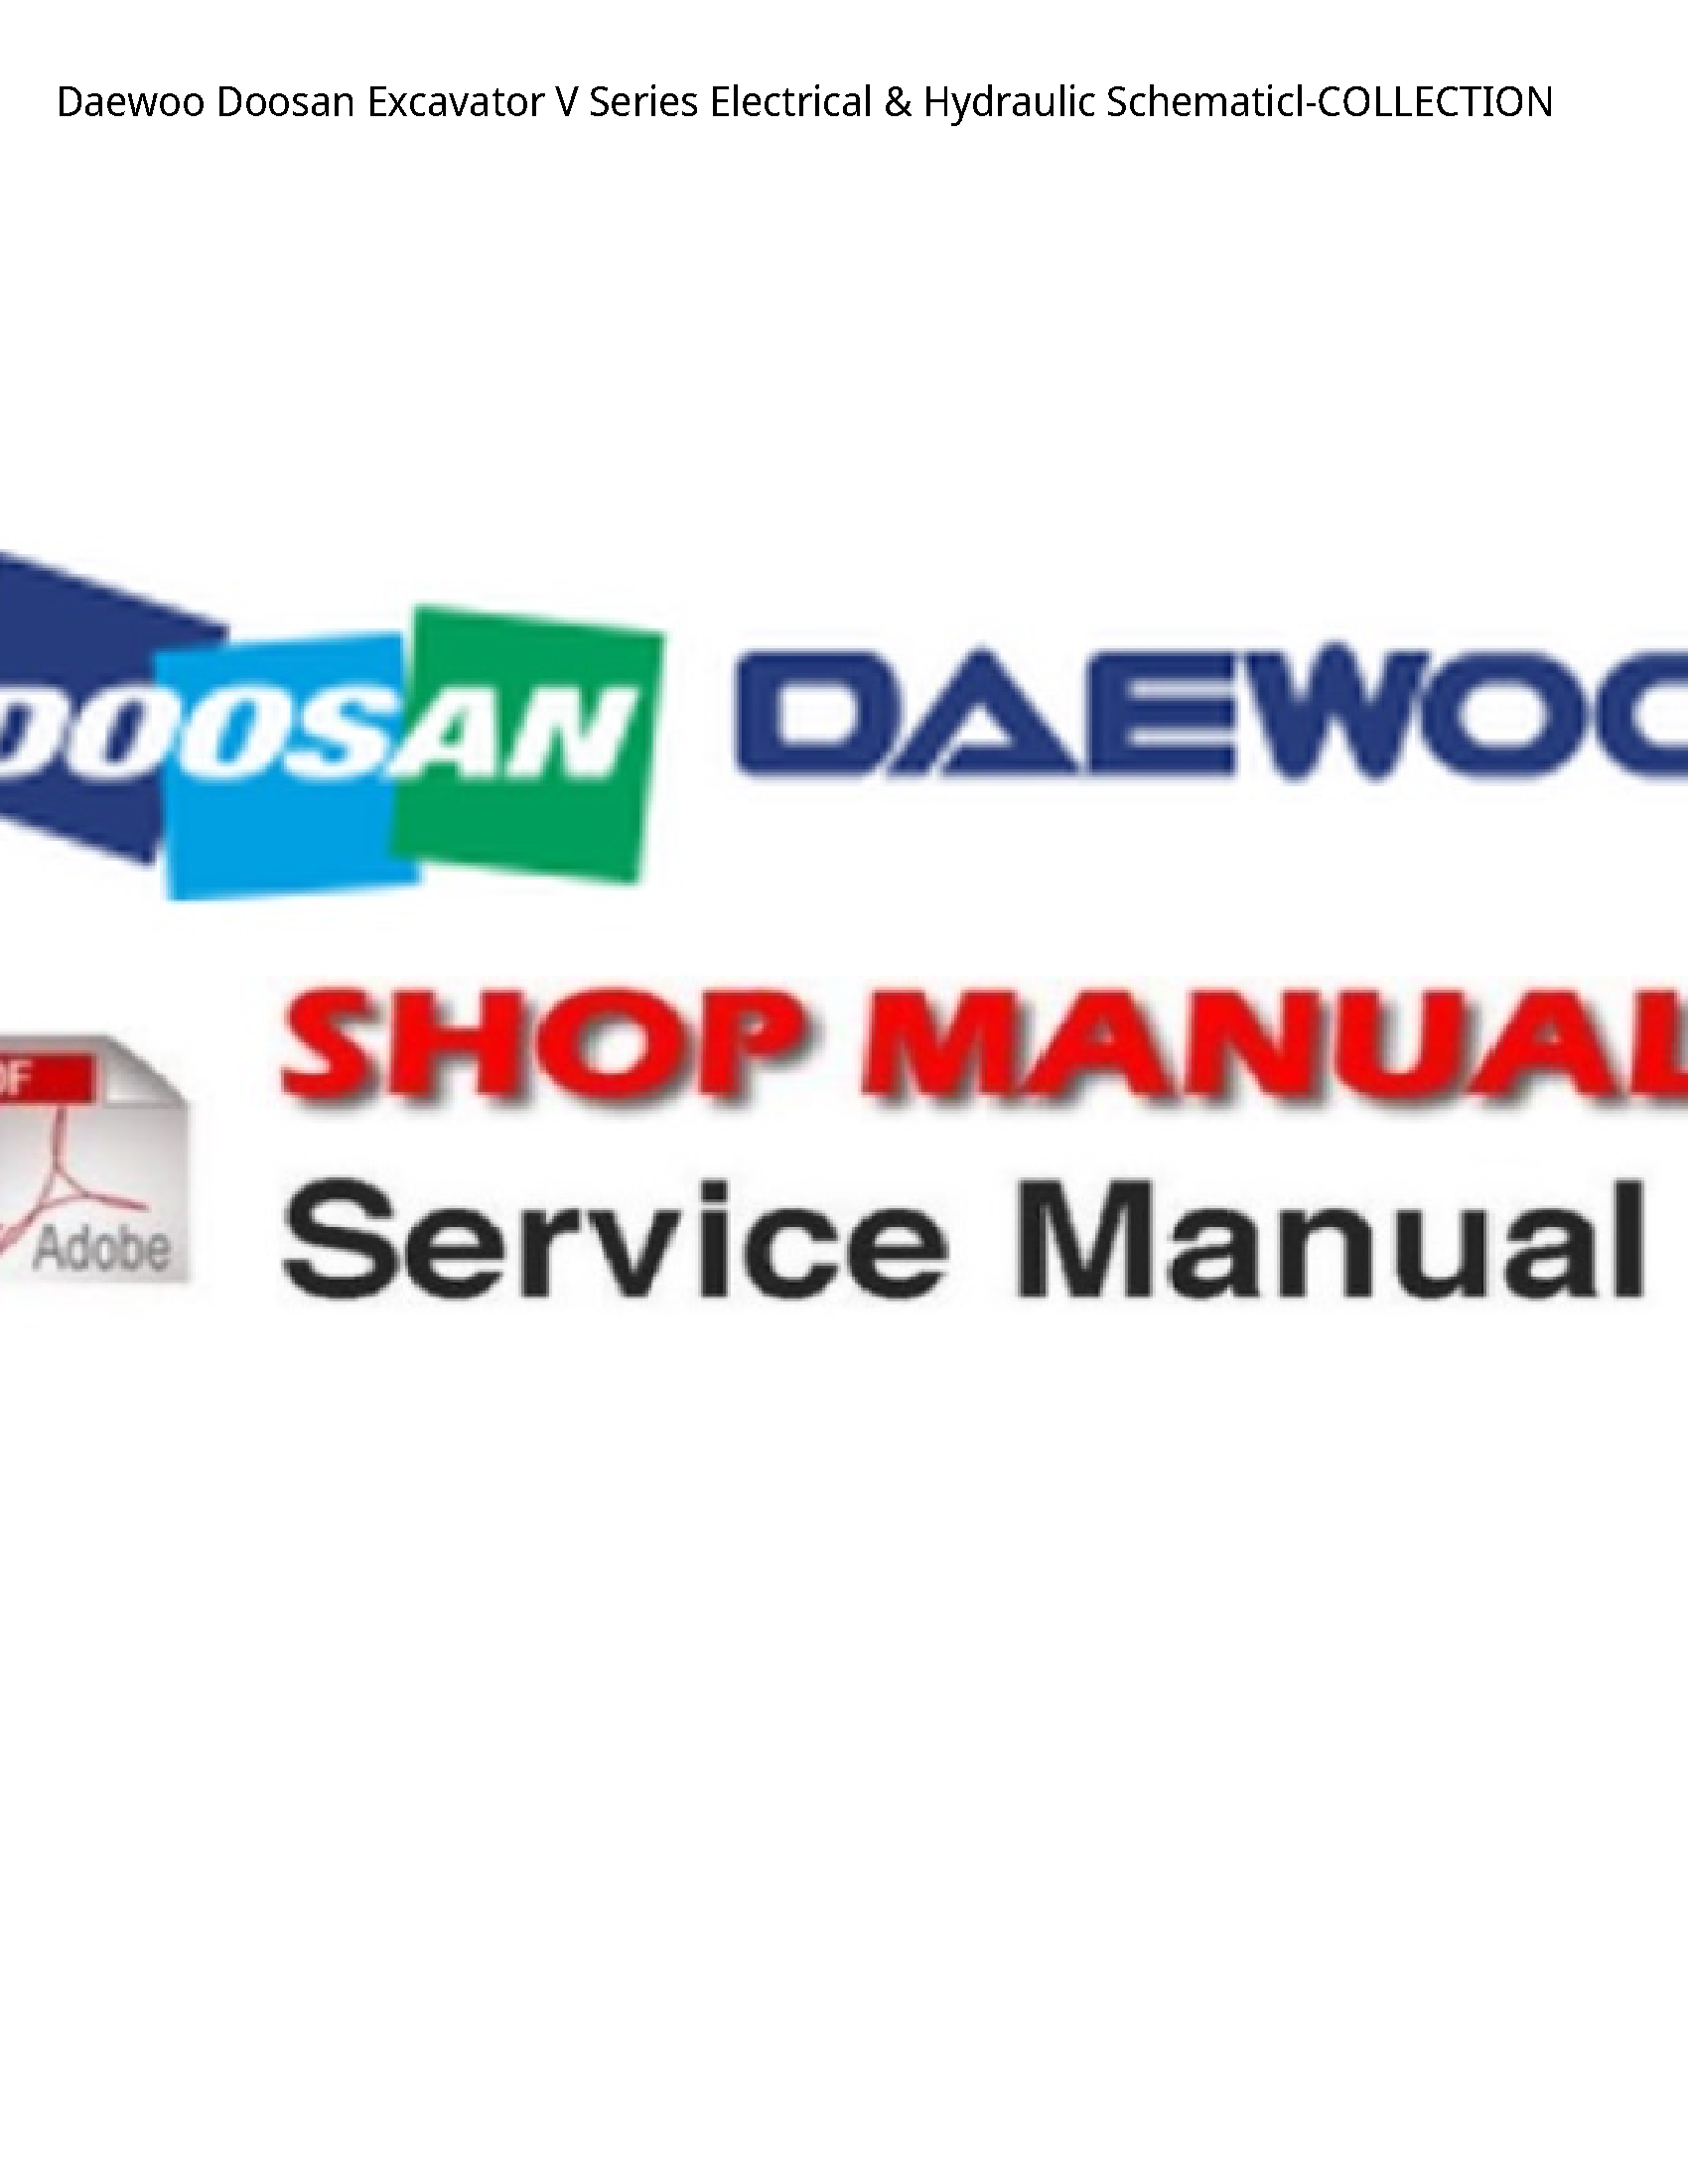 Daewoo Doosan Excavator Series Electrical Hydraulic Schematicl-COLLECTION manual